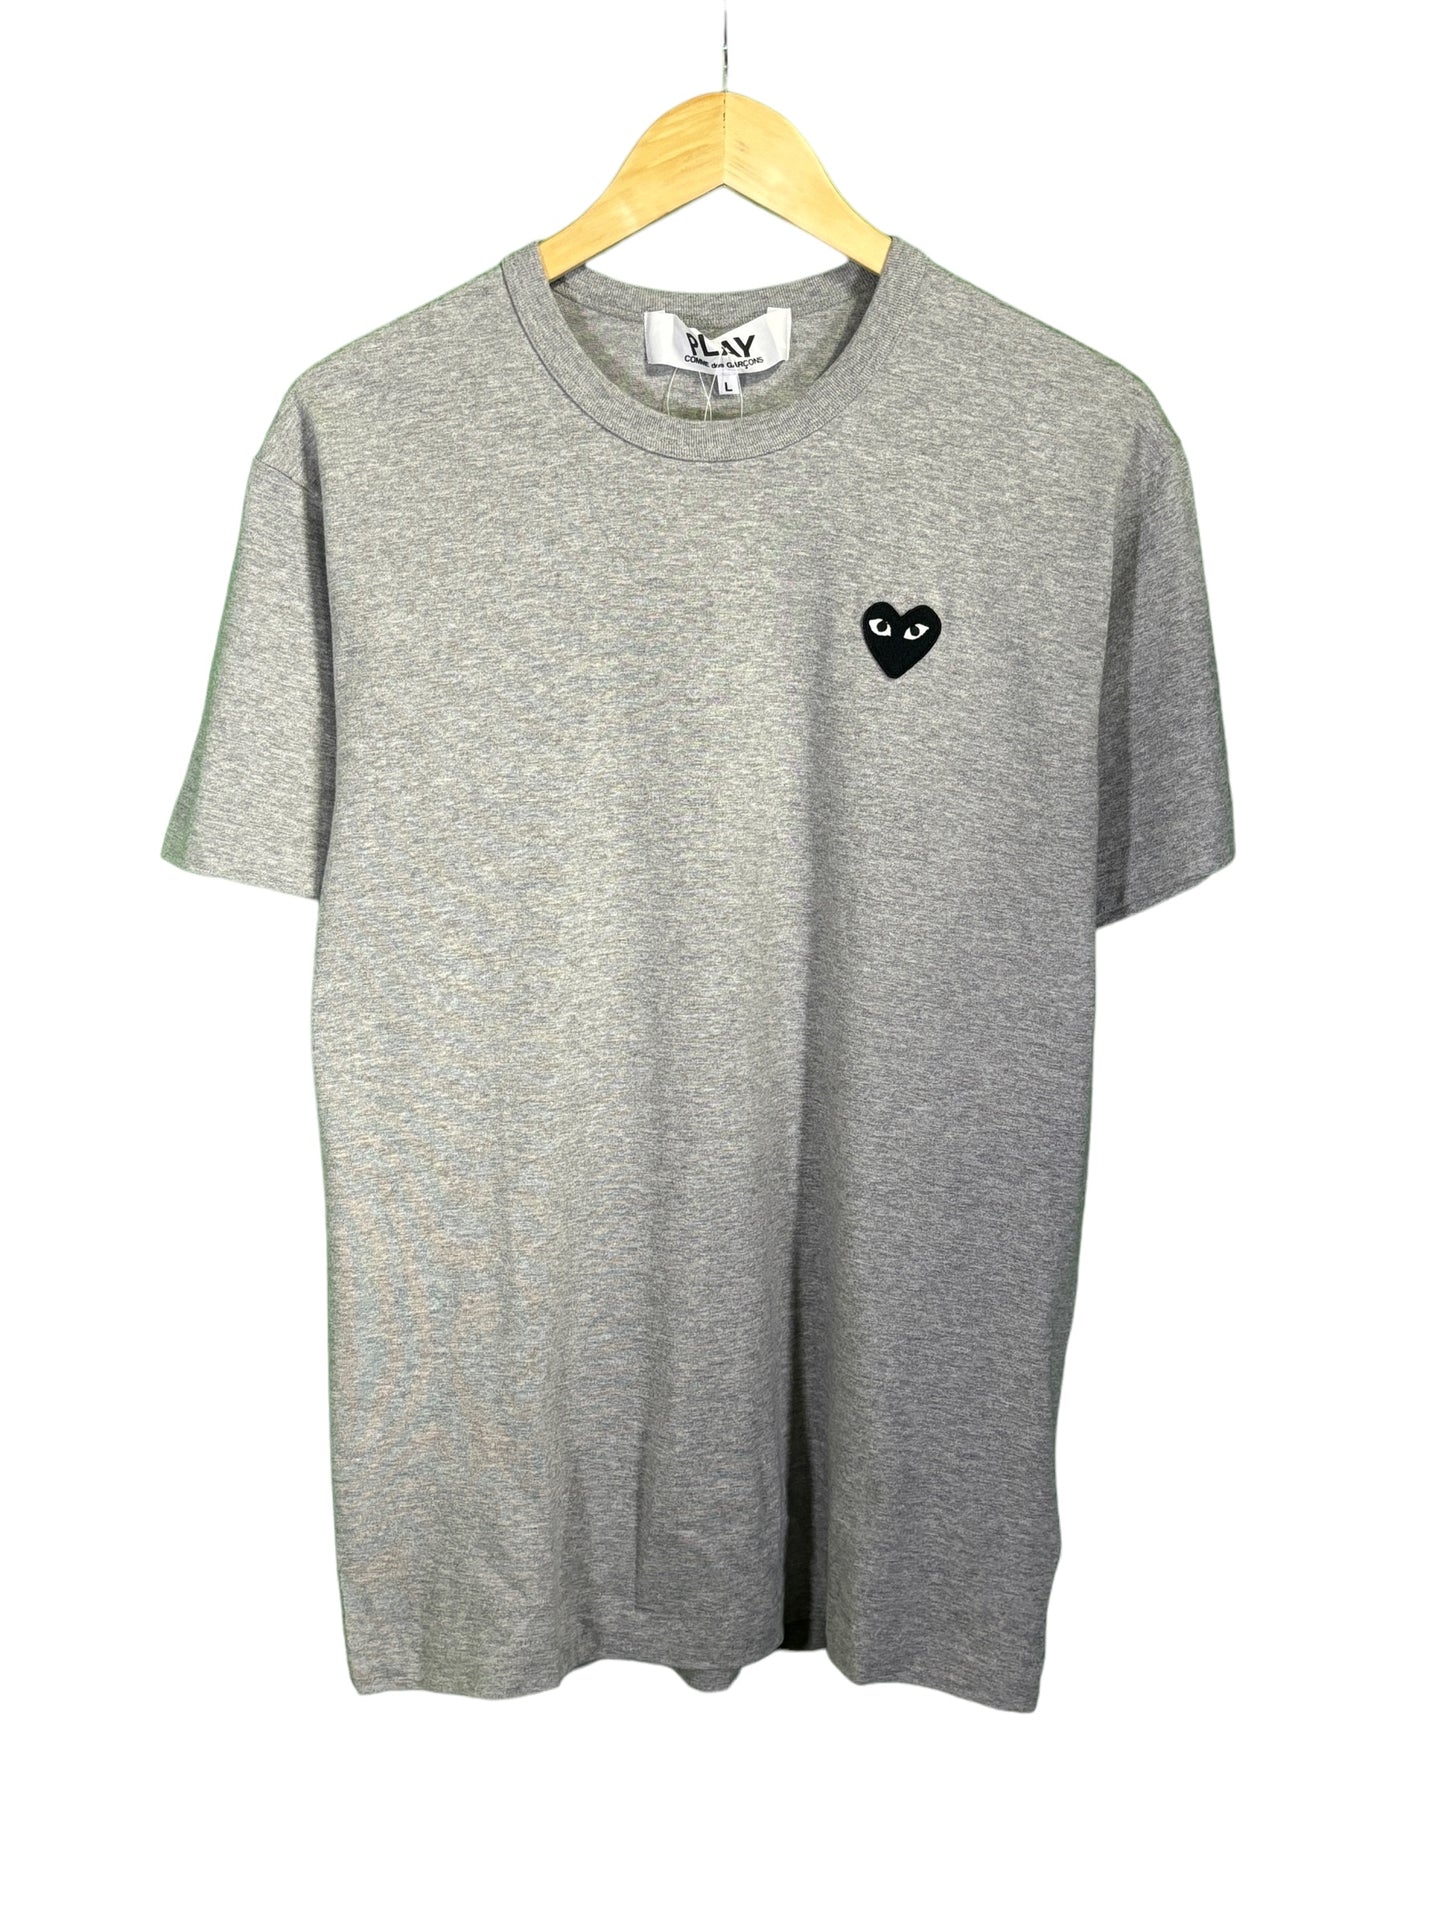 Comme des Garcons CDG Small One Heart Patch Tee Size Large (DS)